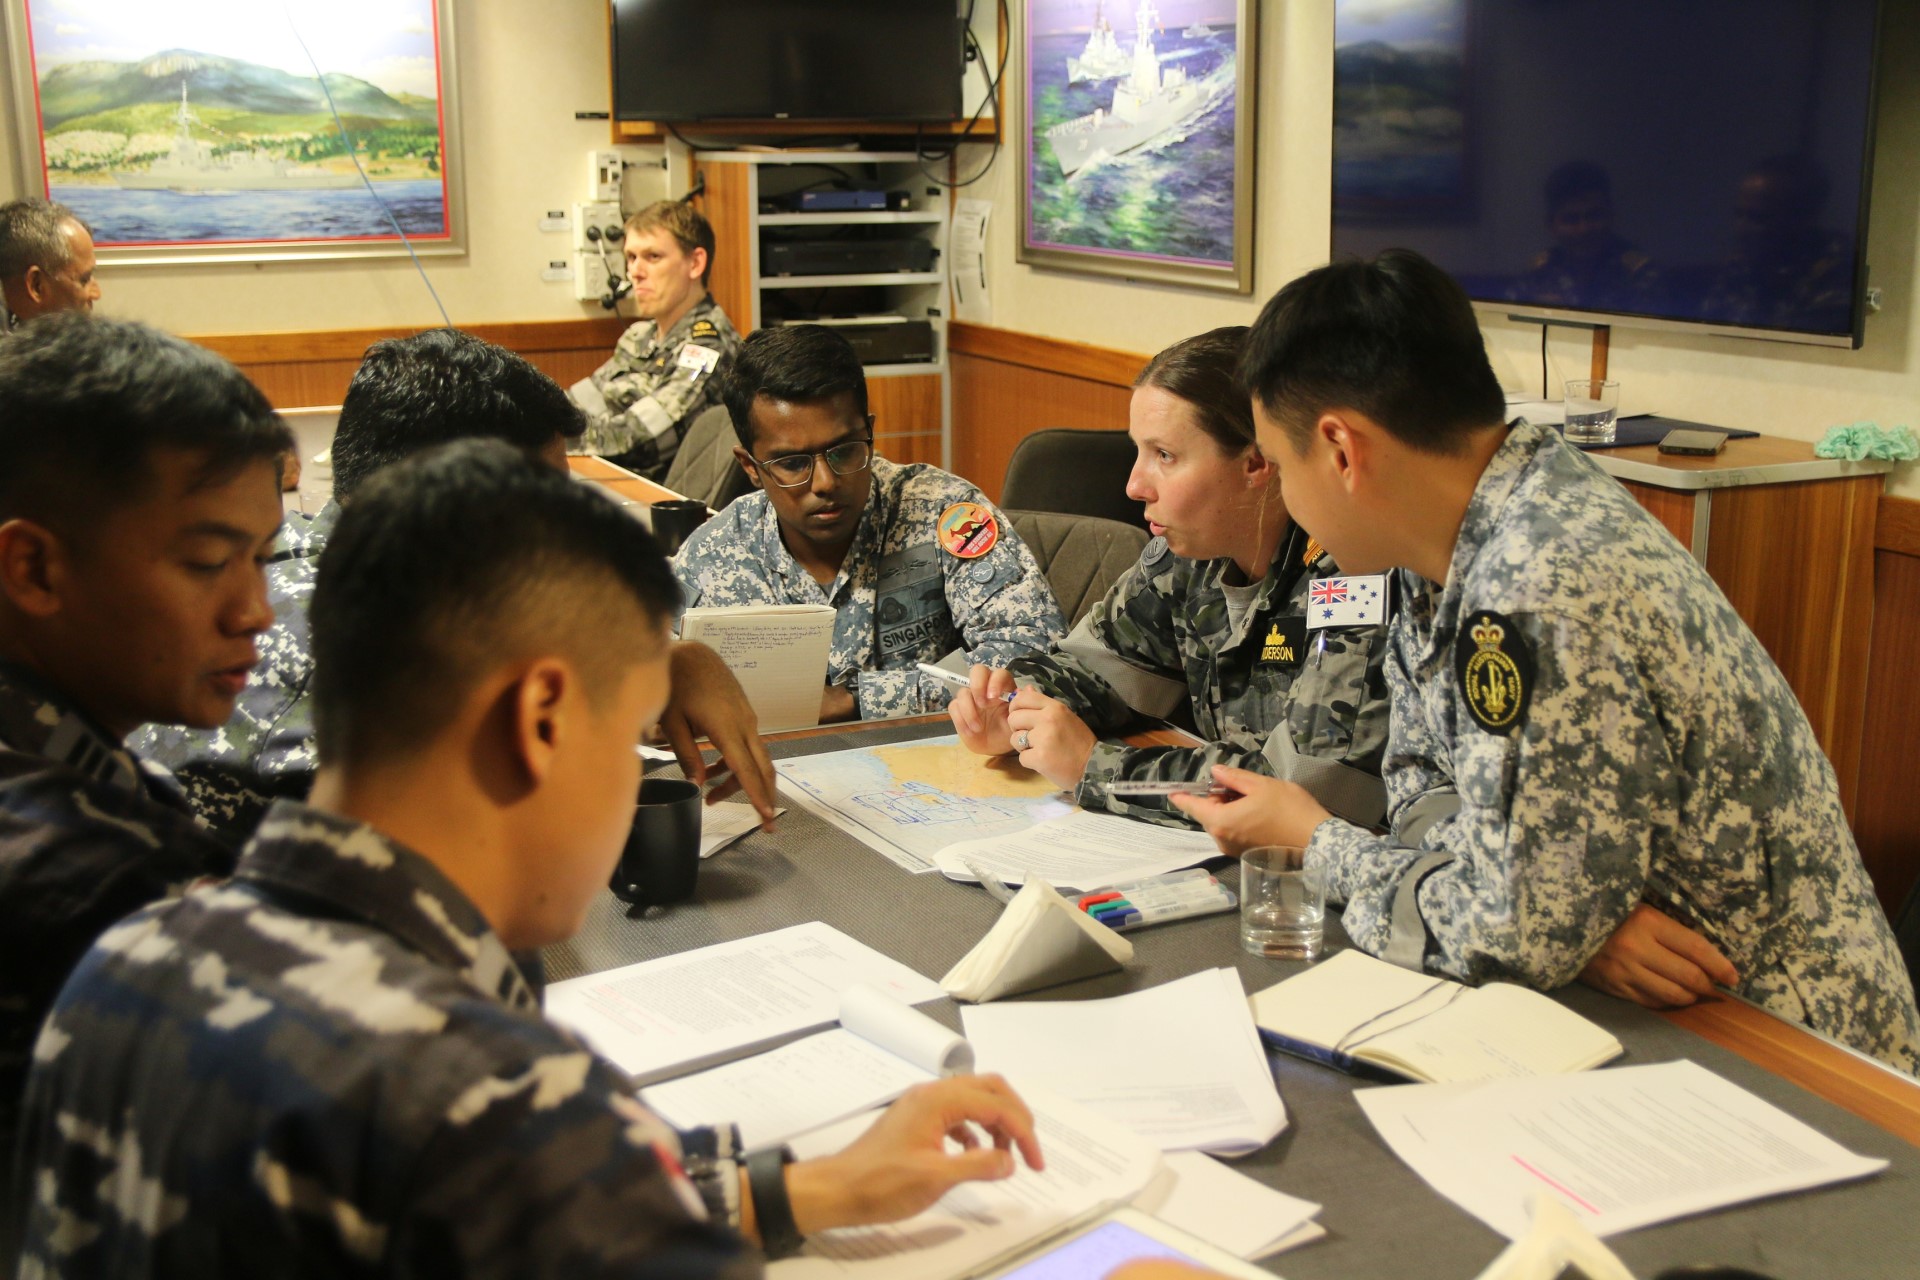 RSN personnel conducting planning for the exercise with personnel from the Royal Australian Navy (RAN) and the Indonesian Navy (TNI AL).